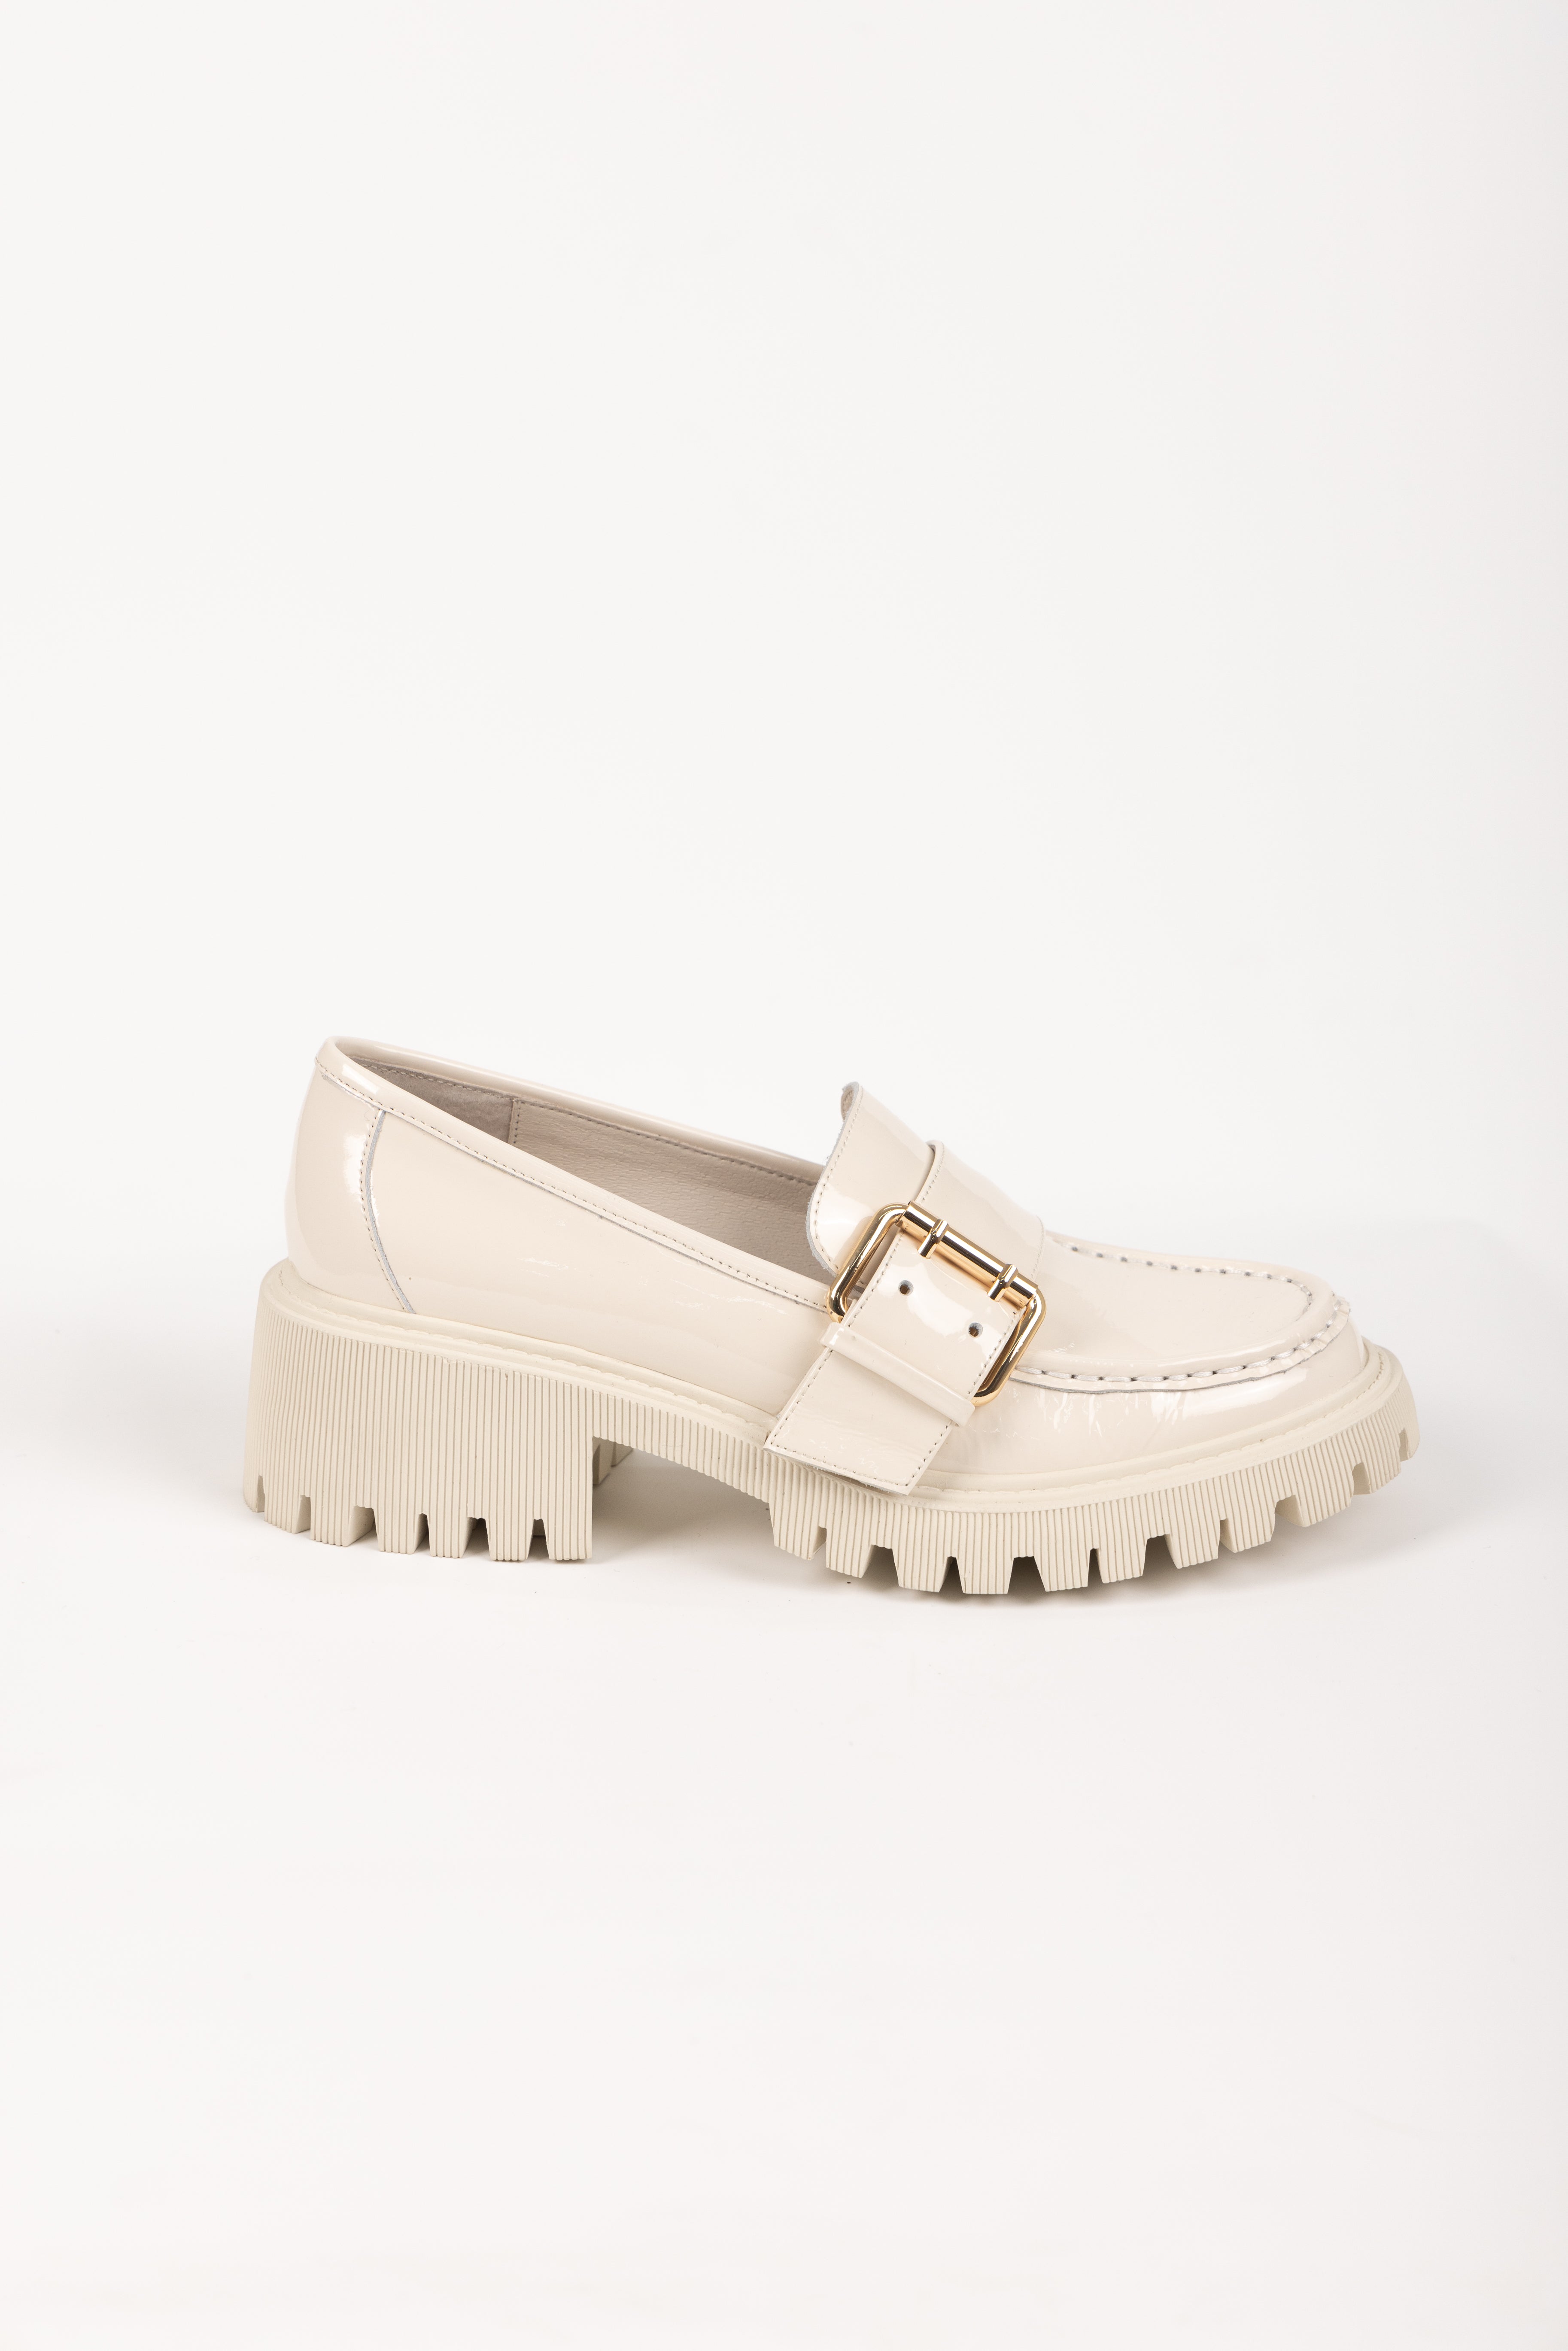 QUAZE LOAFER IVORY PATENT LEATHER